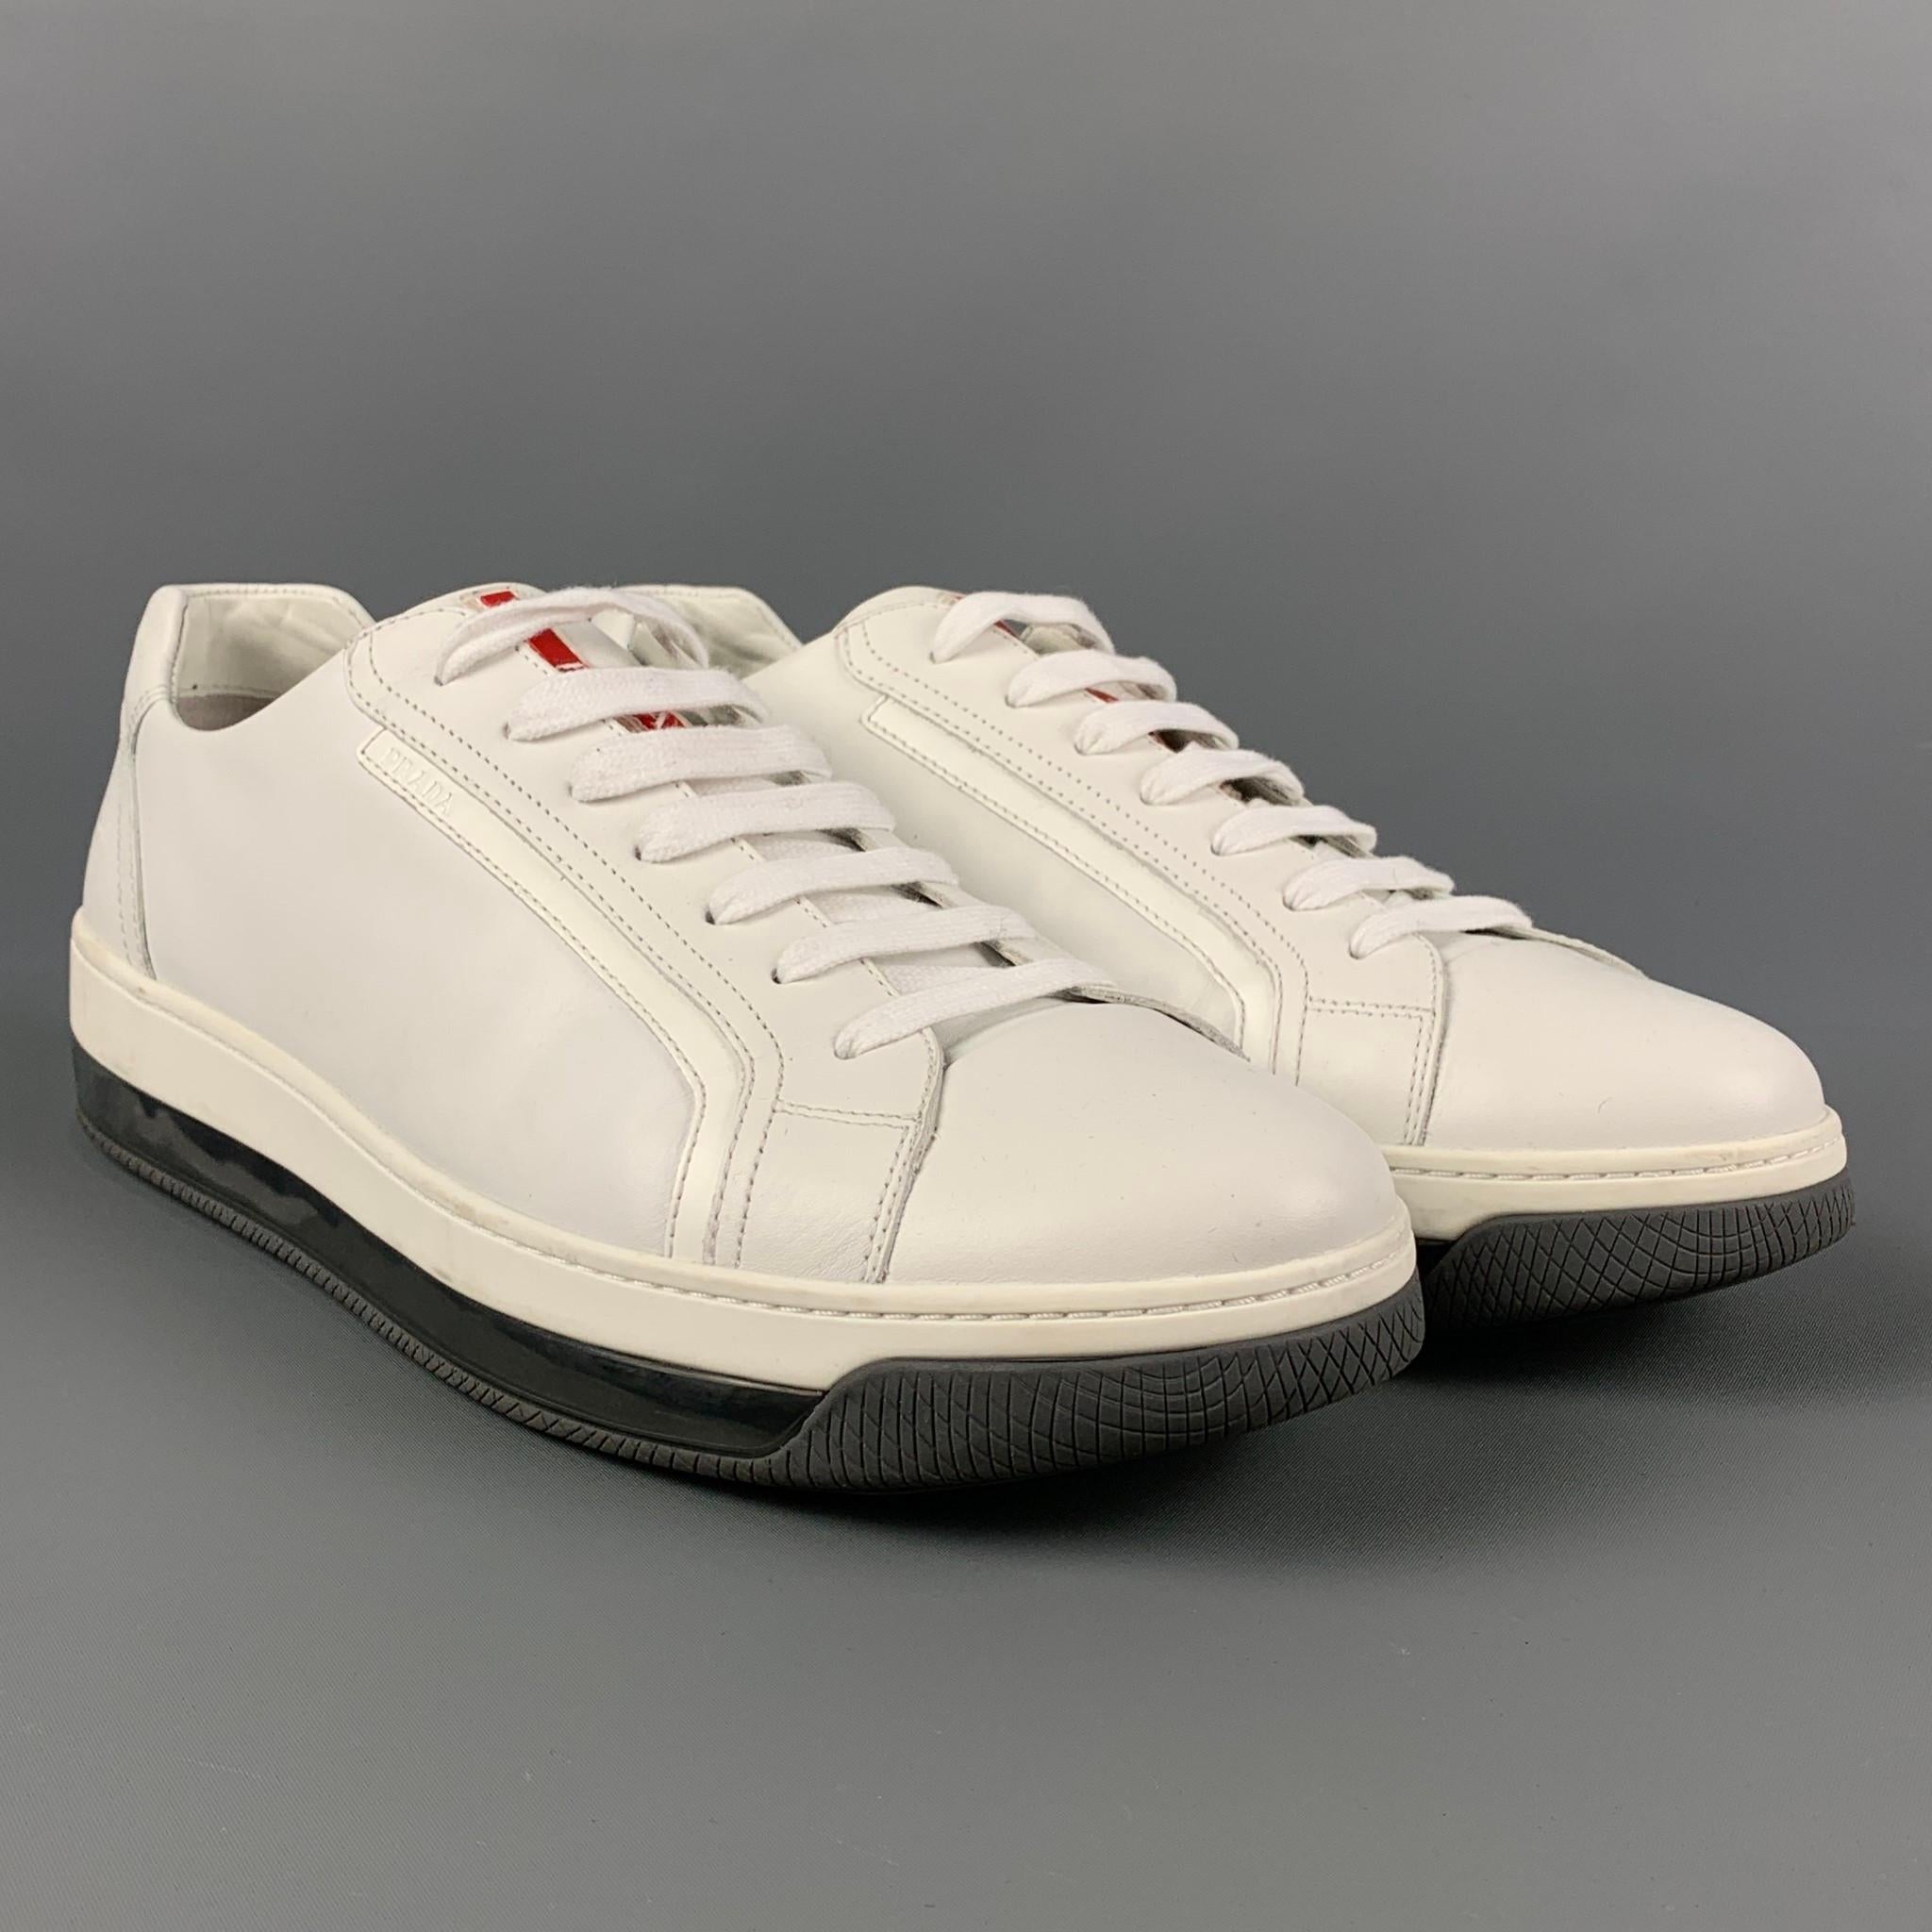 PRADA sneakers comes in a white leather featuring a low top style, transparent rubber sole, and a lace up closure. Includes box. 

Very Good Pre-Owned Condition.
Marked: 4E 2701 10.5
Original Retail Price: $690.00

Outsole: 12.25 in. x 4.25 in. 